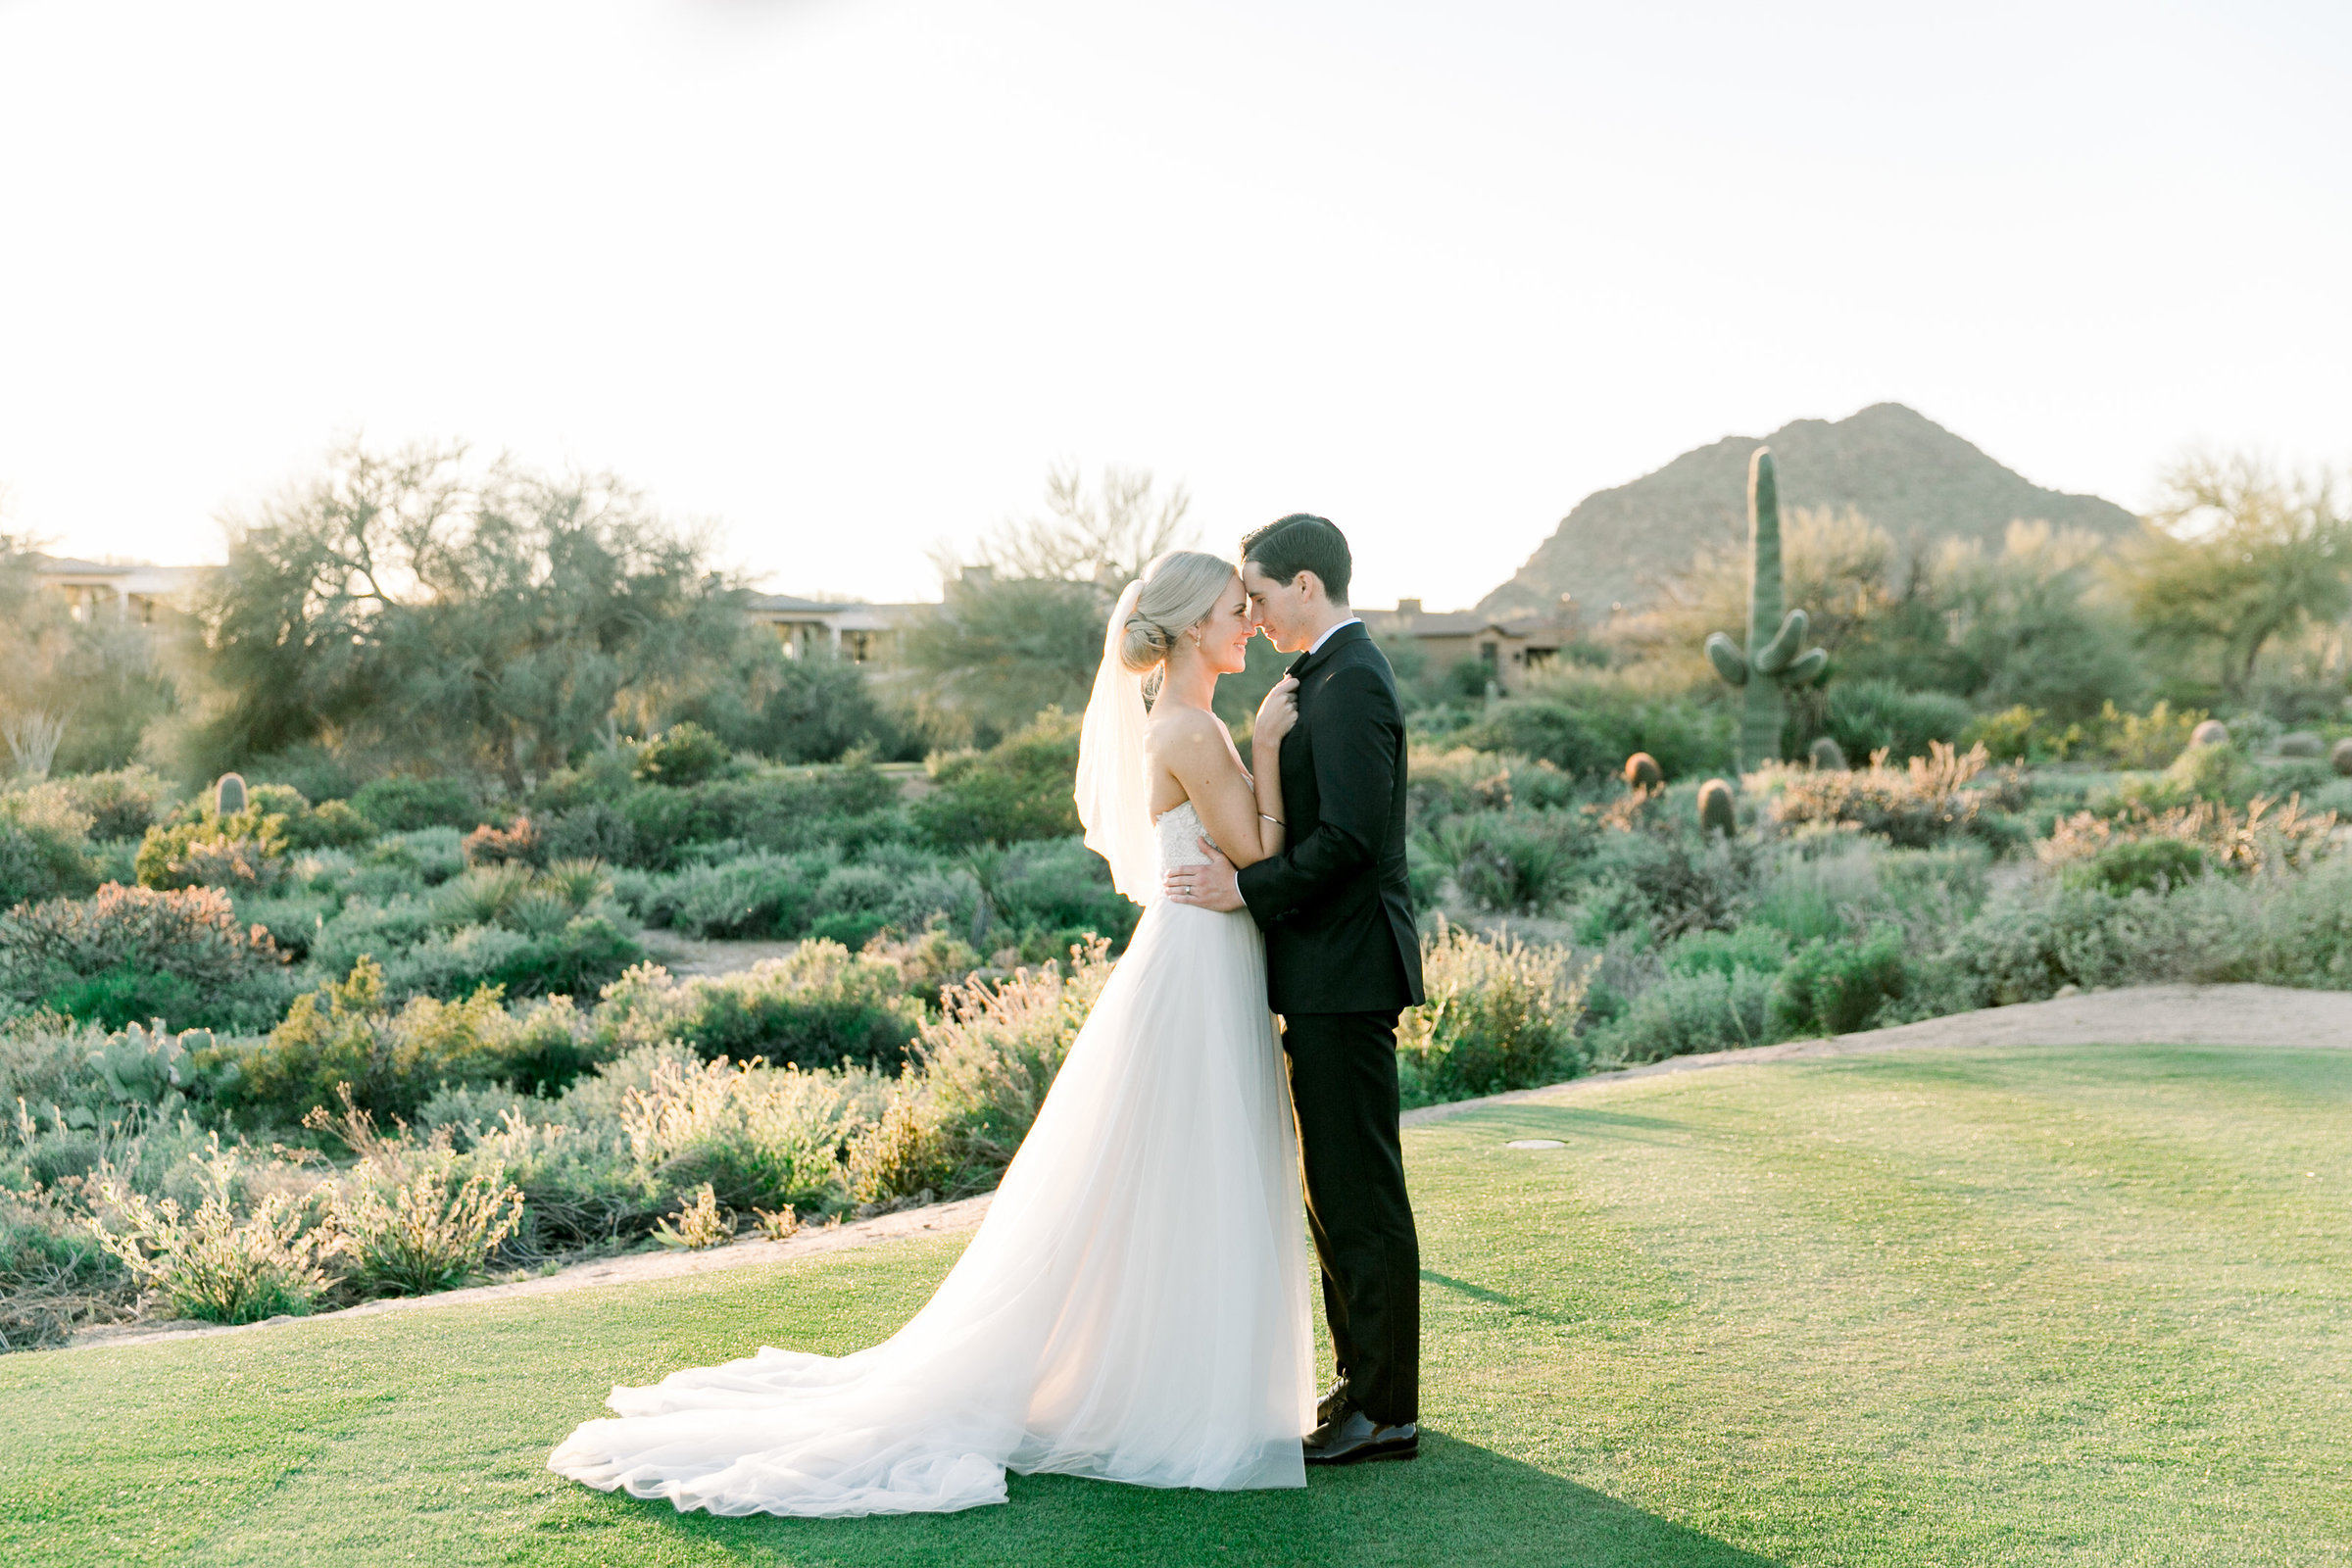 Karlie Colleen Photography - Arizona Wedding at The Troon Scottsdale Country Club - Paige & Shane -647